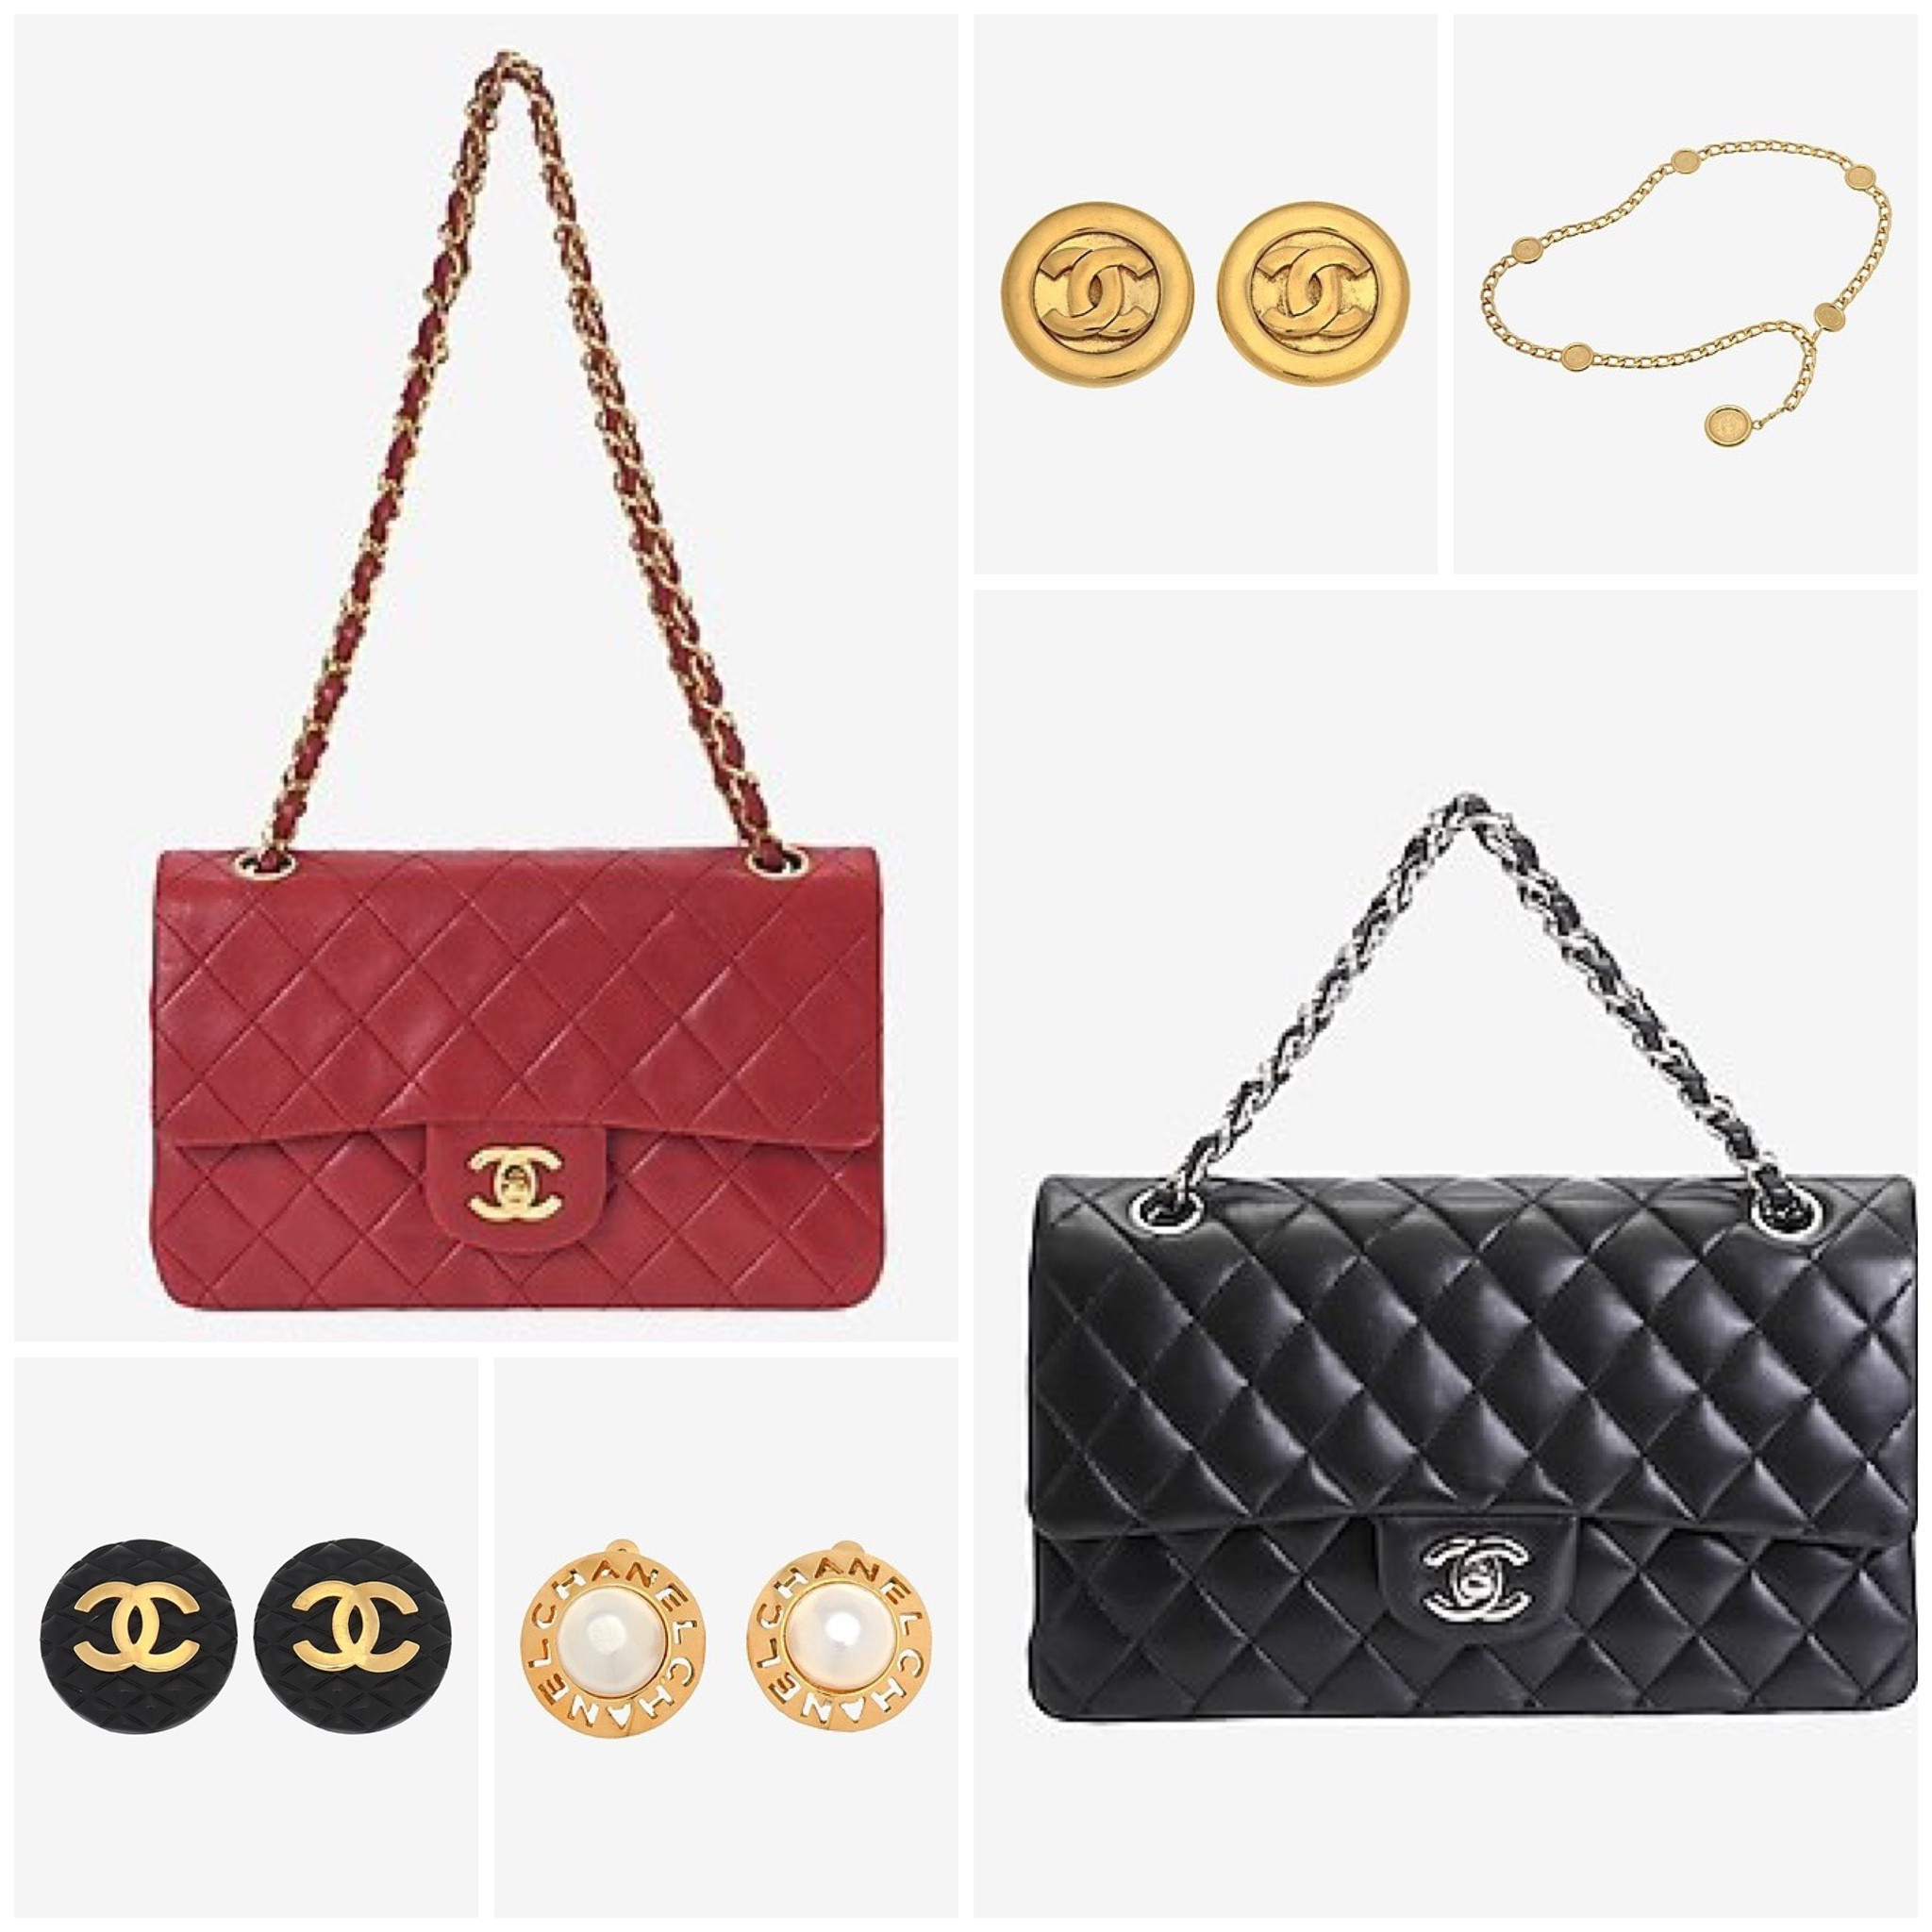 chanel purse for women clearance sale